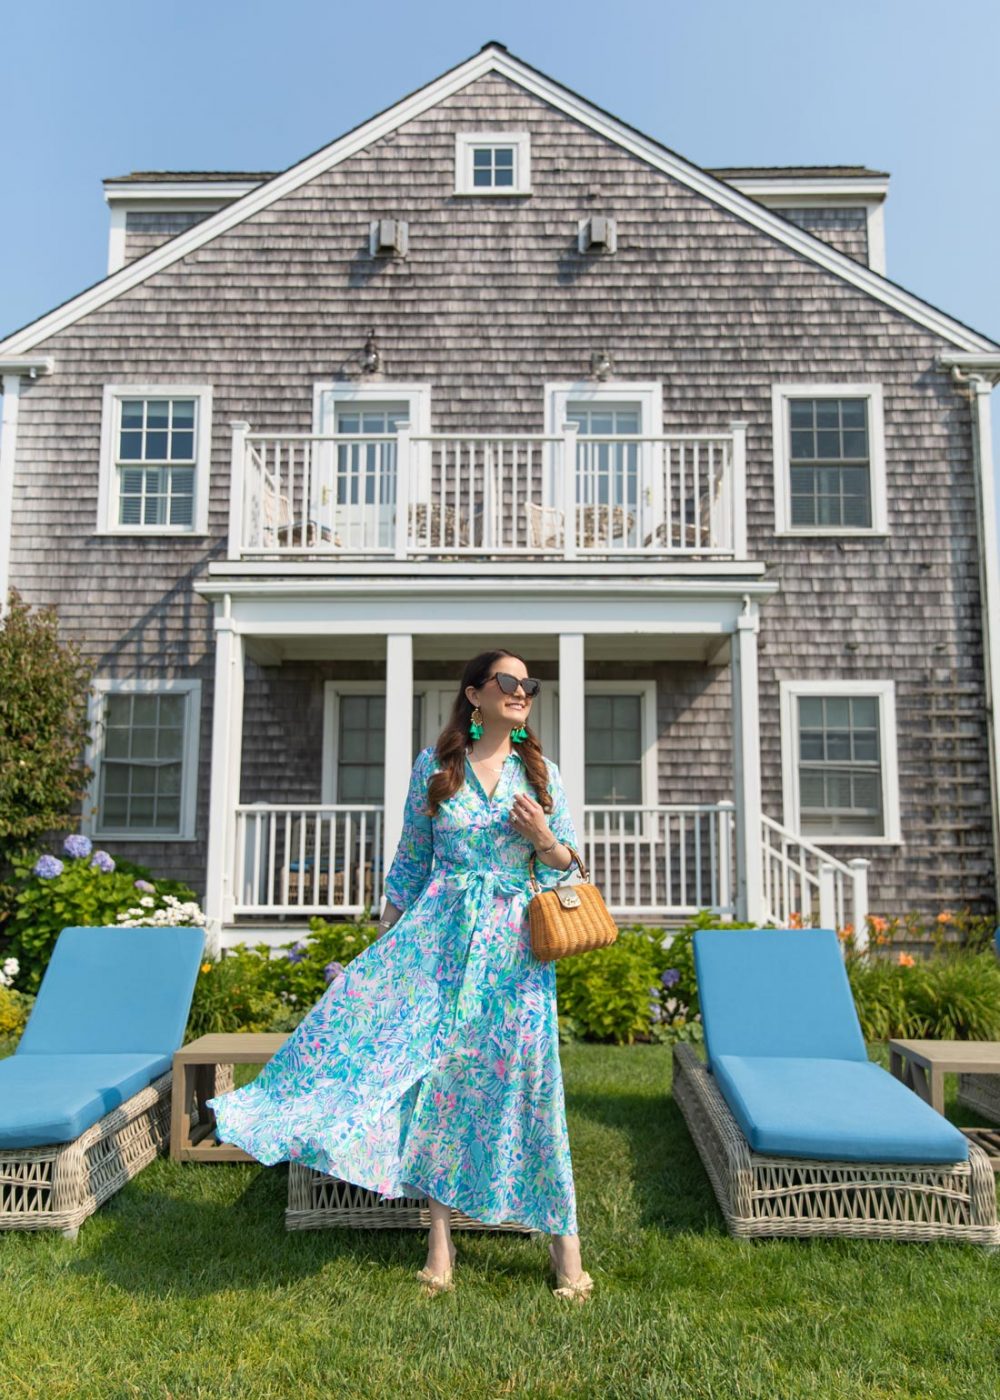 Every Look I Love from the Lilly Pulitzer Summer Collection